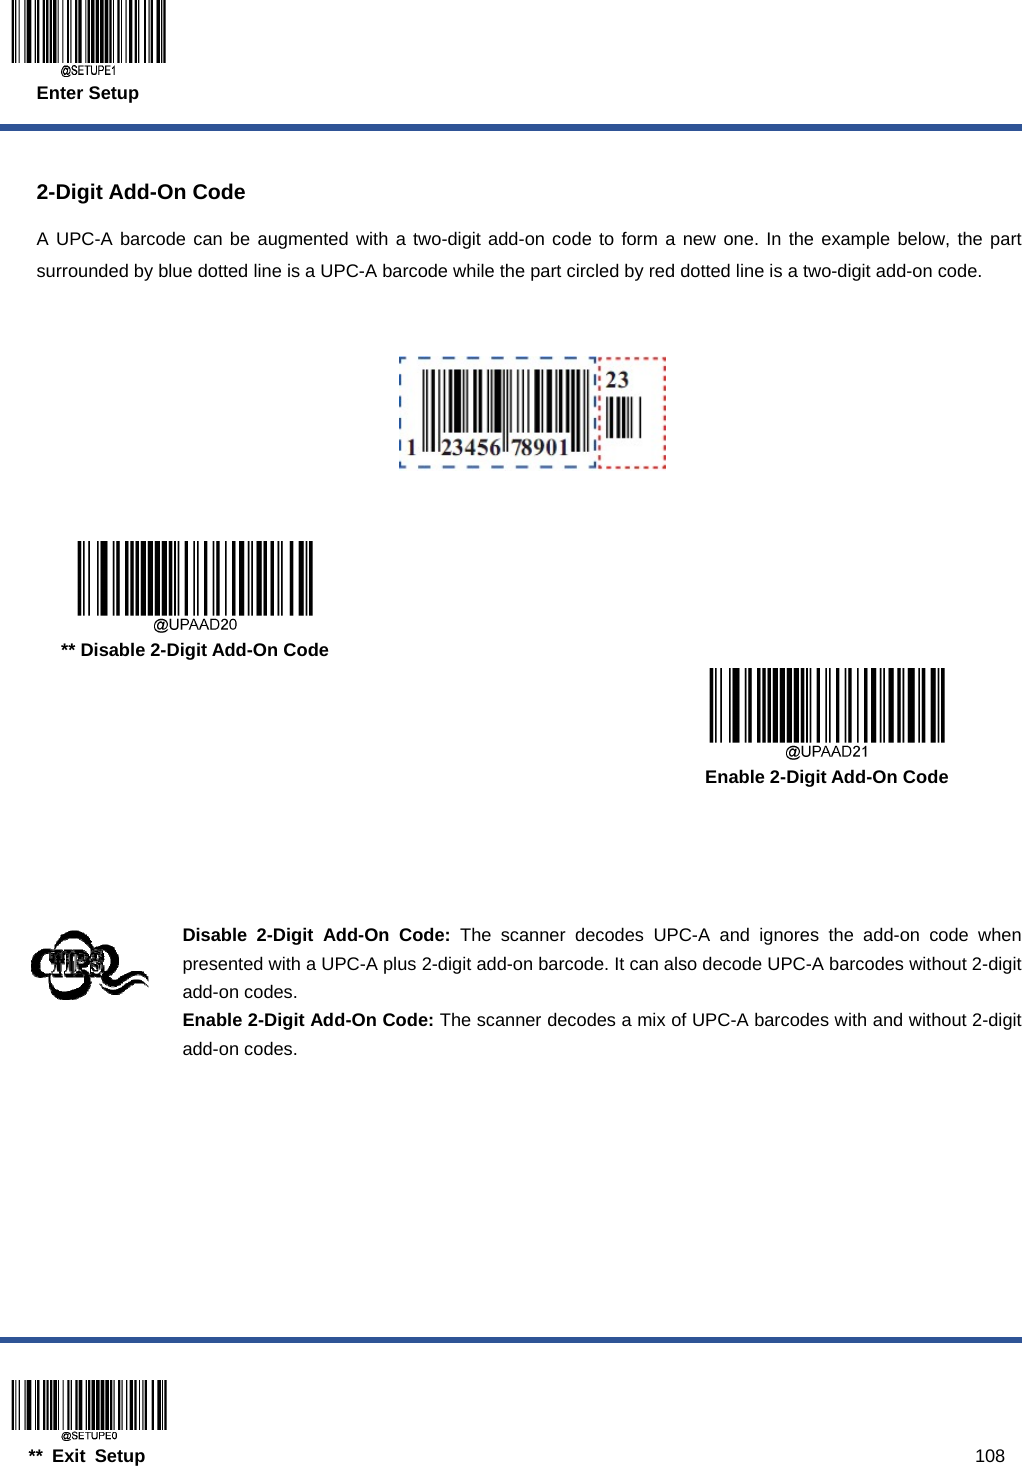  Enter Setup  ** Exit Setup                                                                                           108  2-Digit Add-On Code A UPC-A barcode can be augmented with a two-digit add-on code to form a new one. In the example below, the part surrounded by blue dotted line is a UPC-A barcode while the part circled by red dotted line is a two-digit add-on code.        ** Disable 2-Digit Add-On Code      Enable 2-Digit Add-On Code     Disable 2-Digit Add-On Code: The scanner decodes UPC-A and ignores the add-on code when presented with a UPC-A plus 2-digit add-on barcode. It can also decode UPC-A barcodes without 2-digit add-on codes. Enable 2-Digit Add-On Code: The scanner decodes a mix of UPC-A barcodes with and without 2-digit add-on codes.  